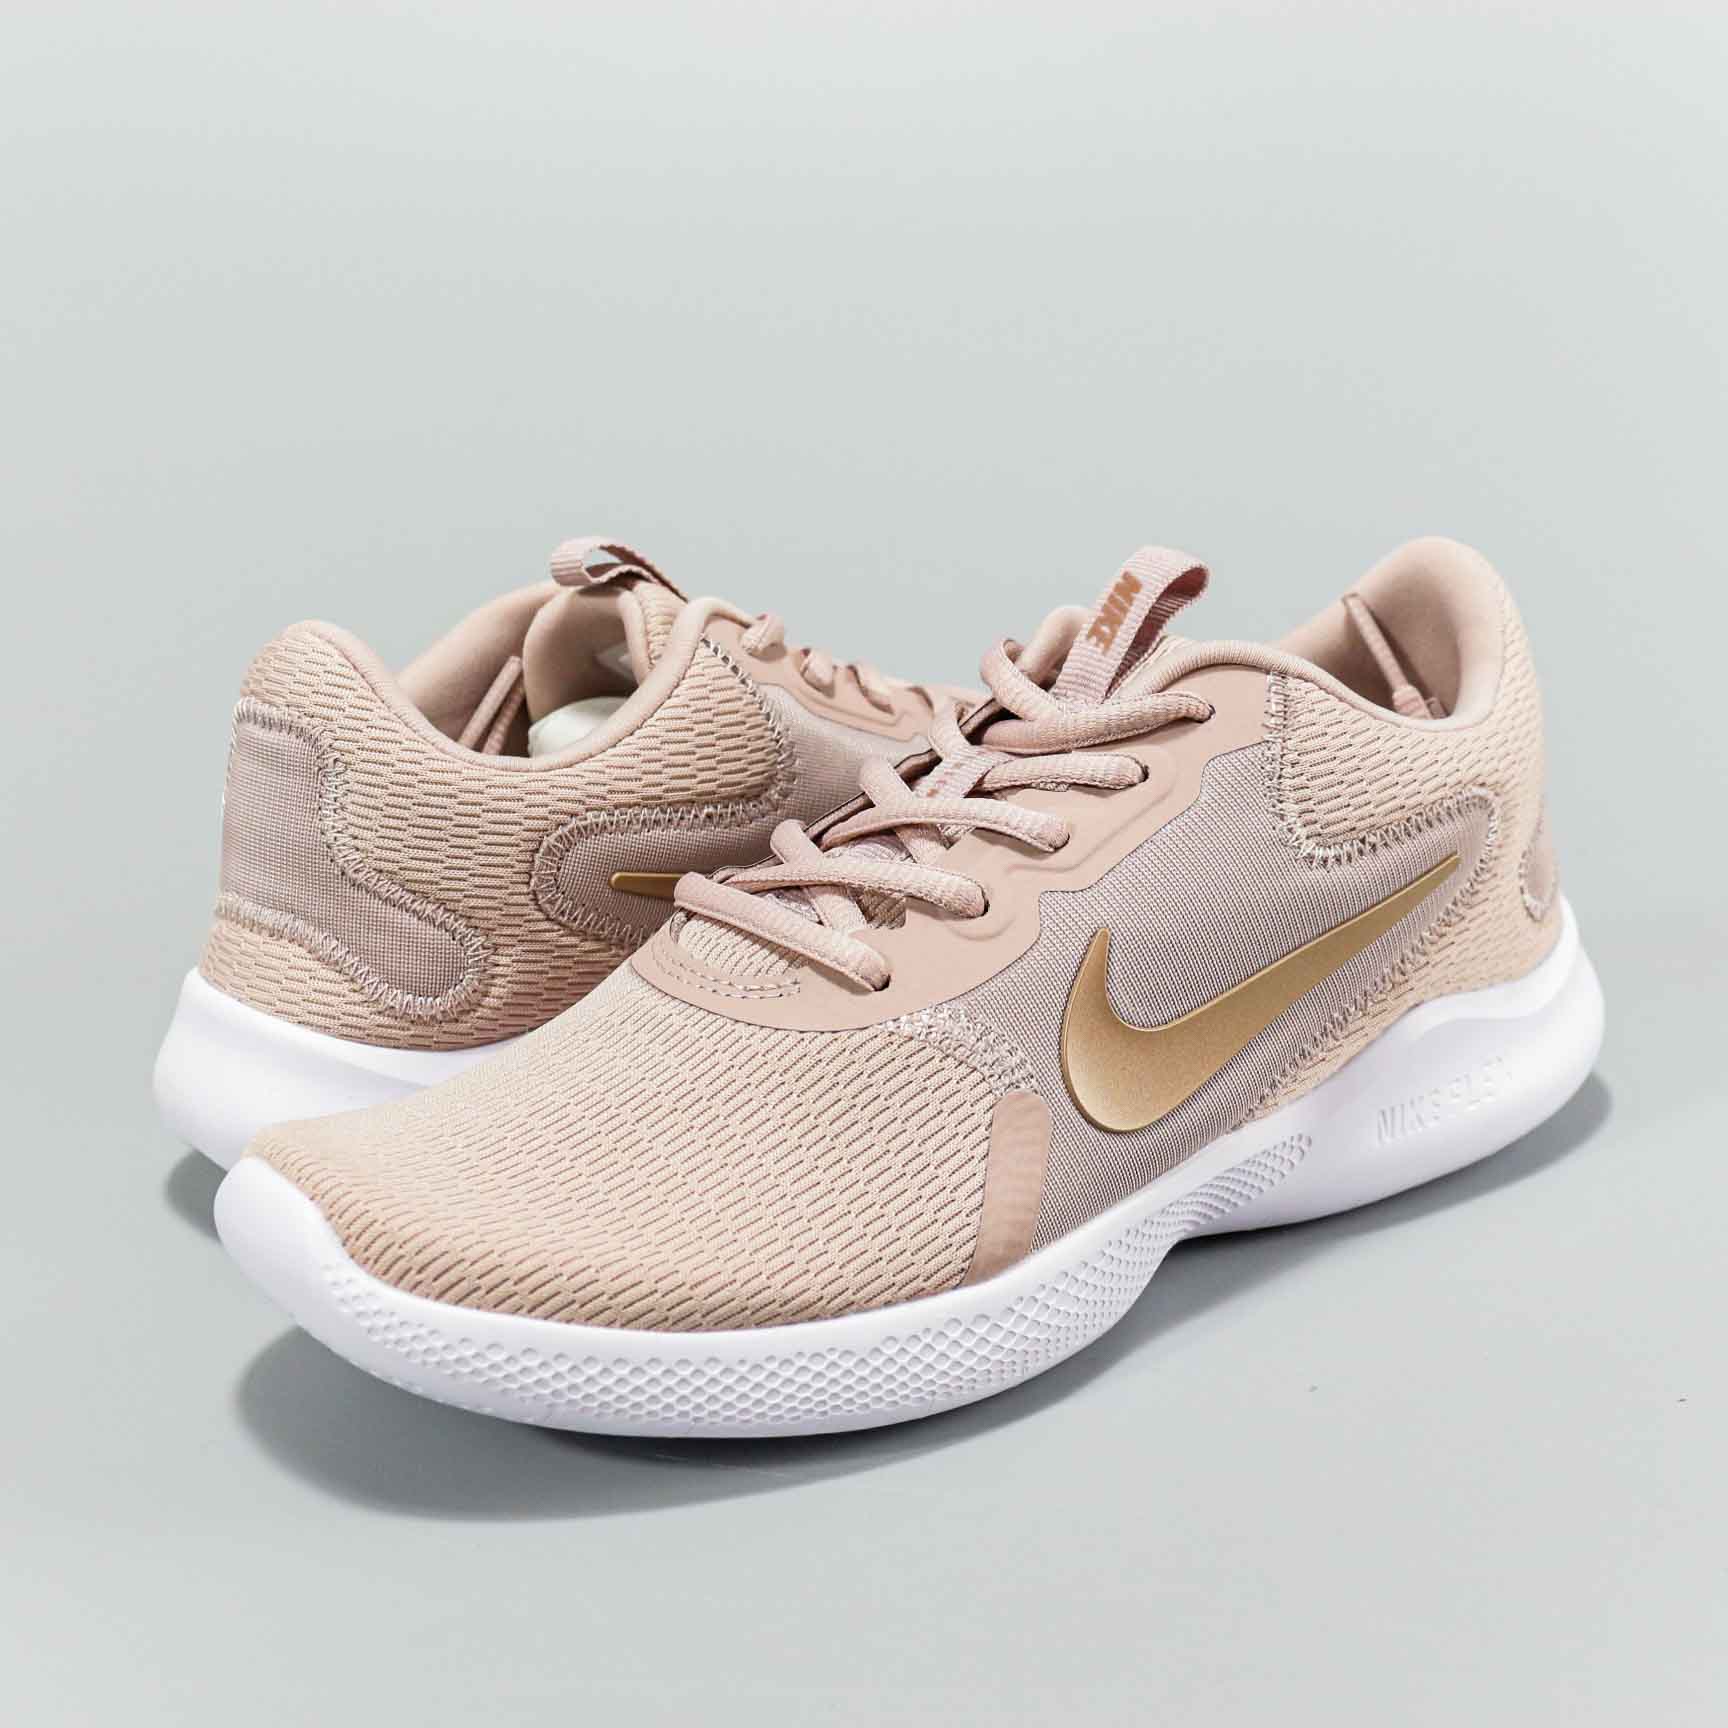 Nike Flex EXPERIENCE RN 9 Rose Gold White Shoes